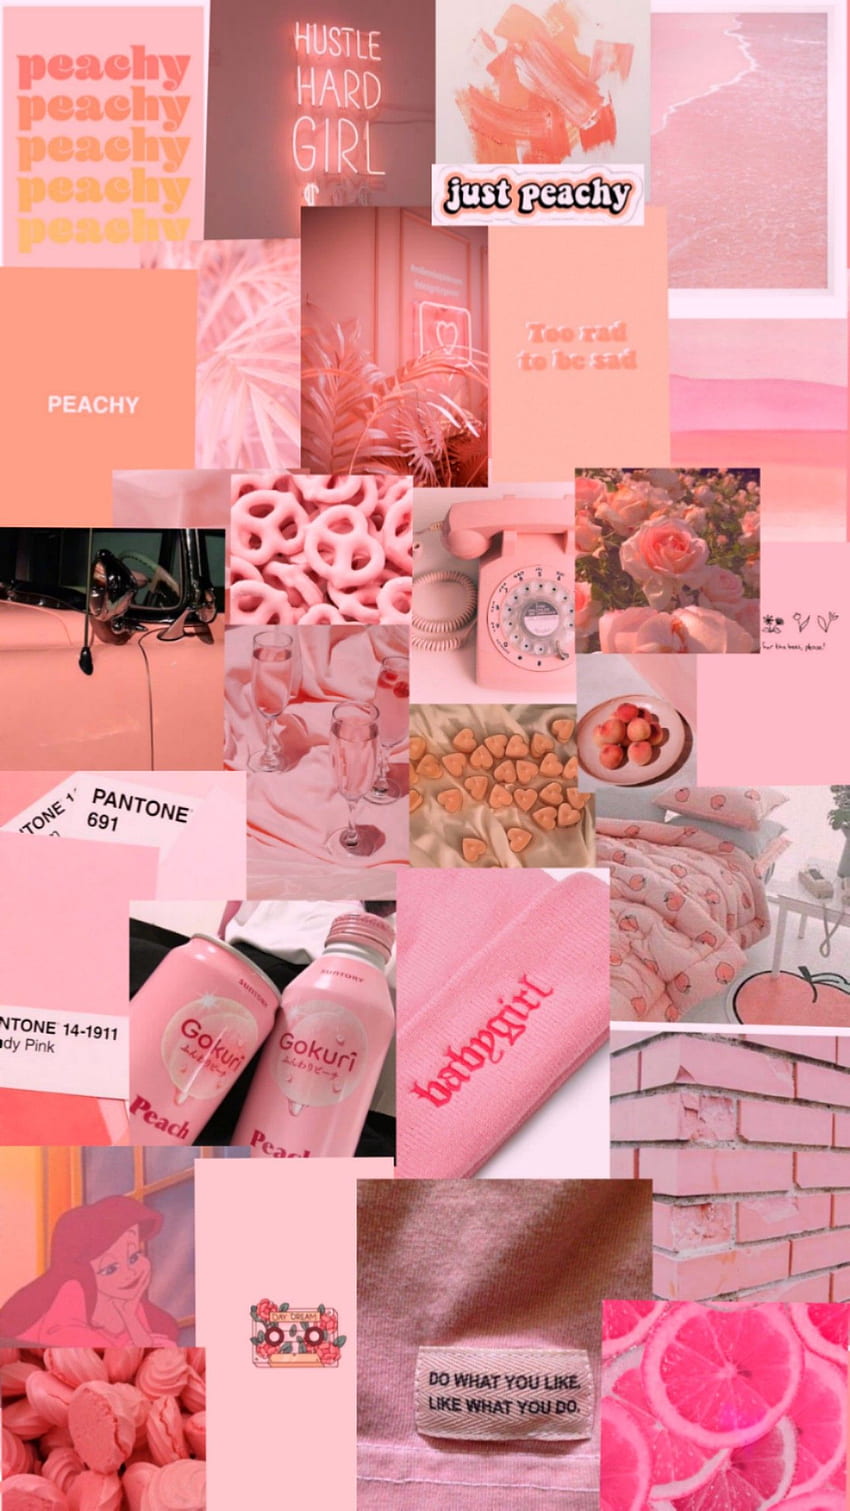 25 Peach Collage Wallpapers  Treat People with Kindness  Idea Wallpapers   iPhone WallpapersColor Schemes